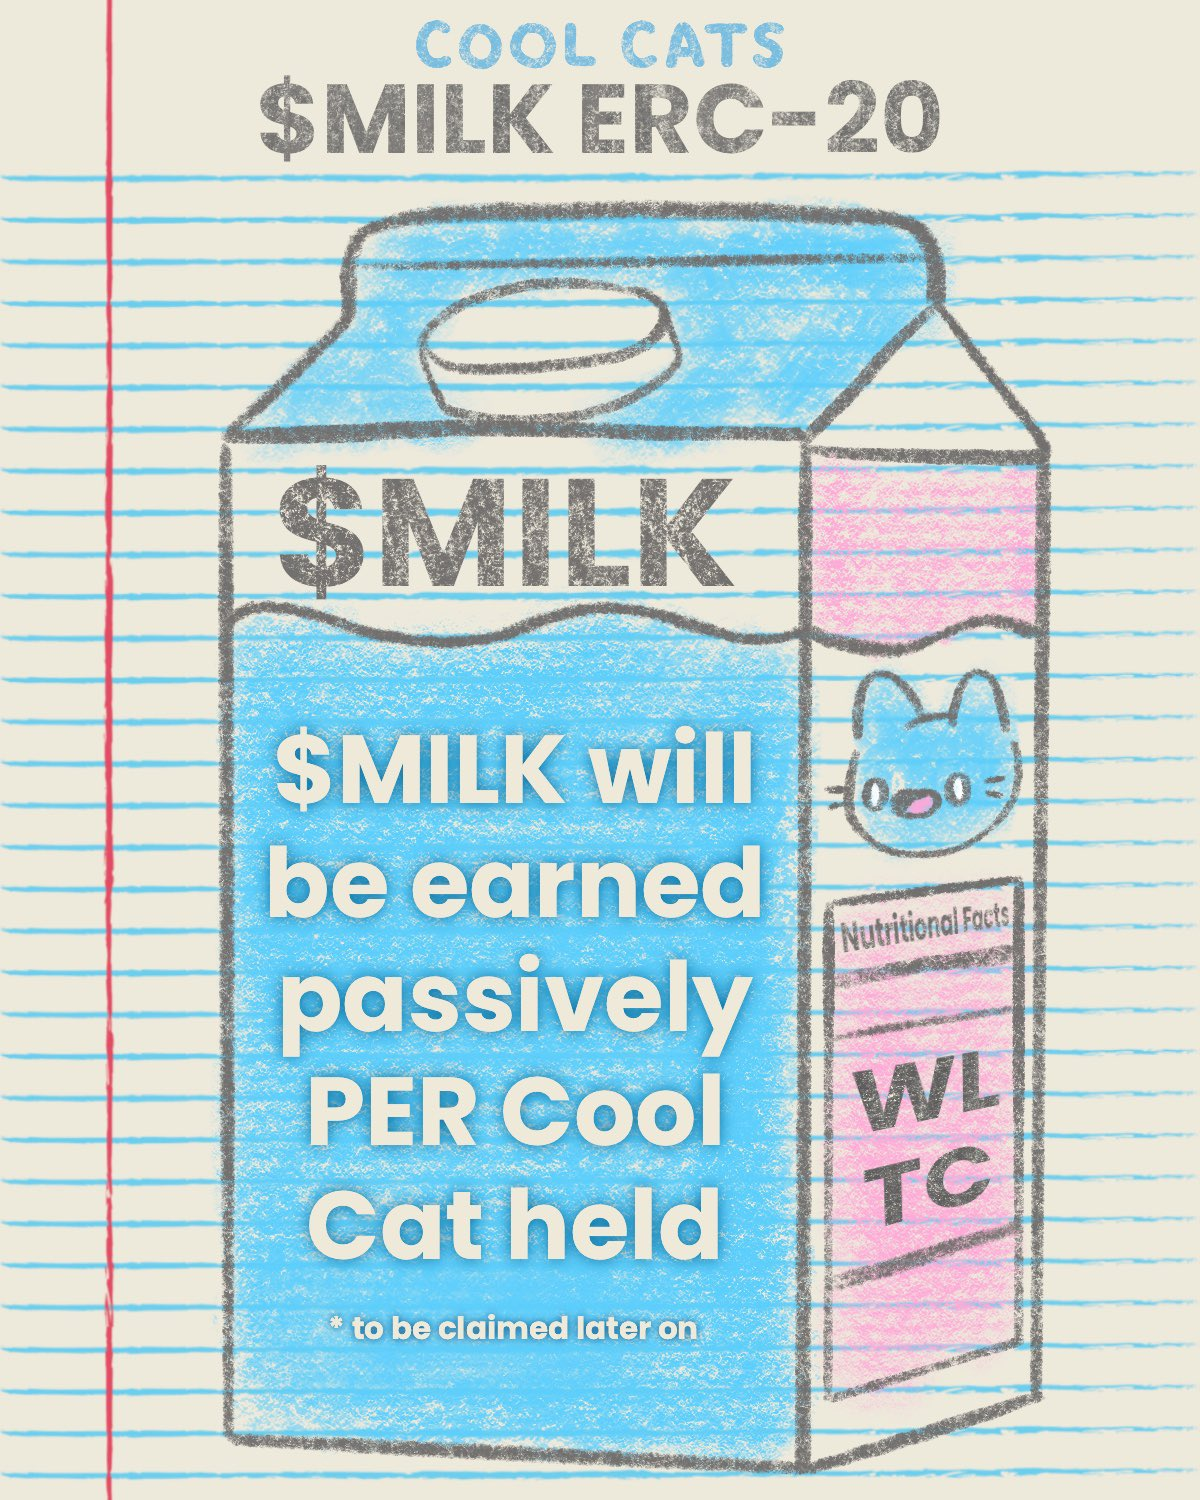 A picture of the Cool Cats $MILK announcement.